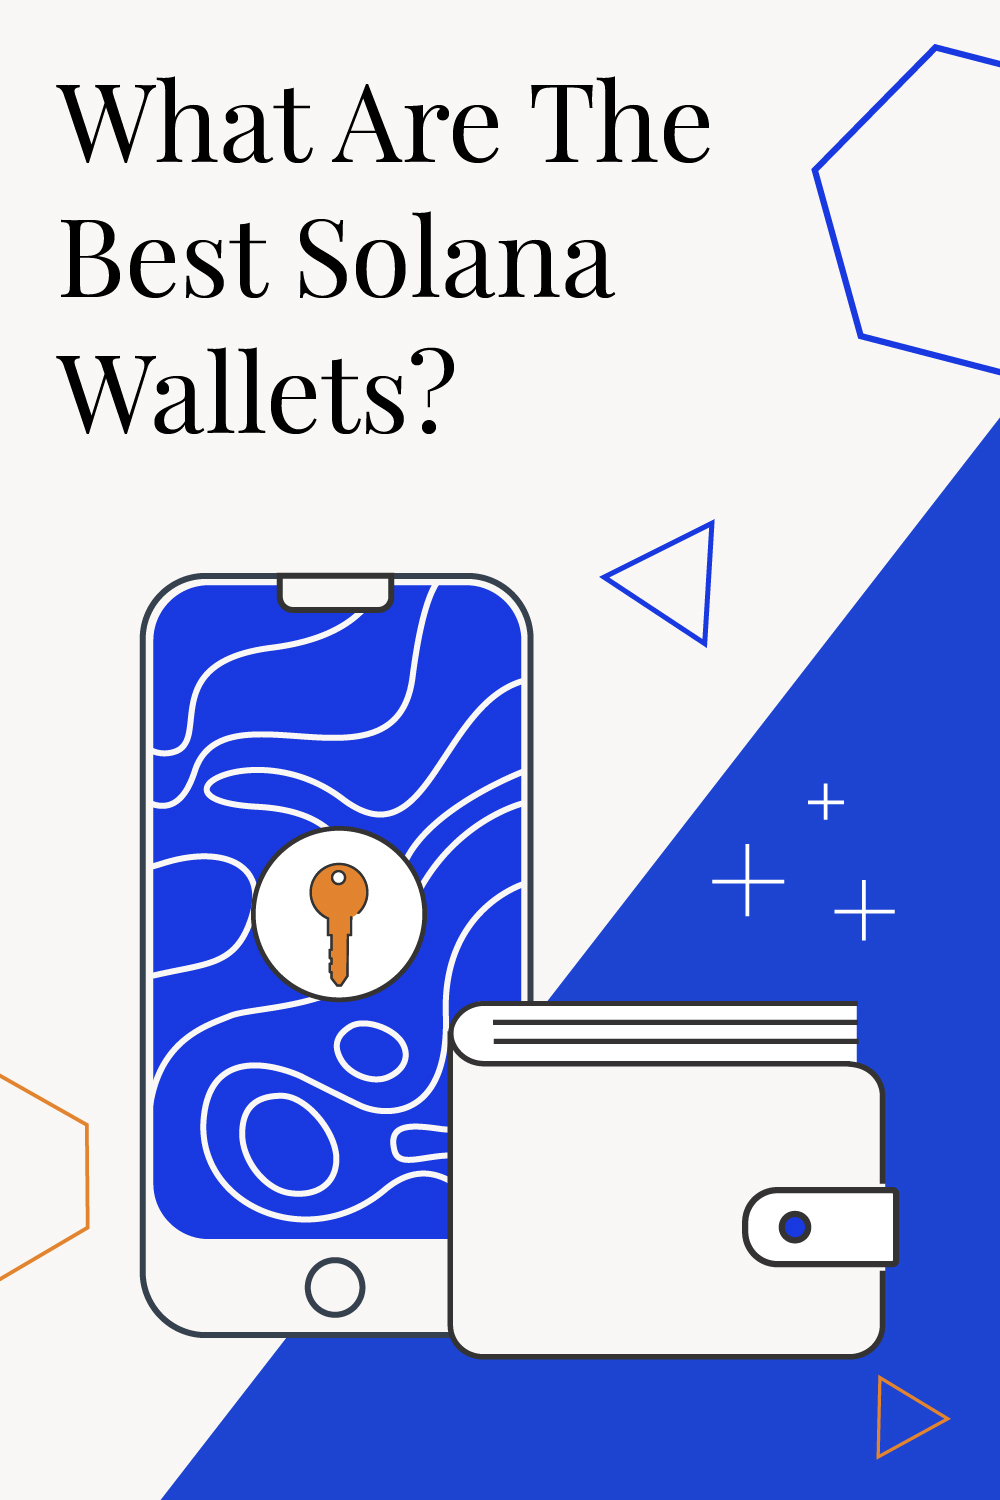 6 Best Solana Wallets For Staking, DeFi, & NFTs